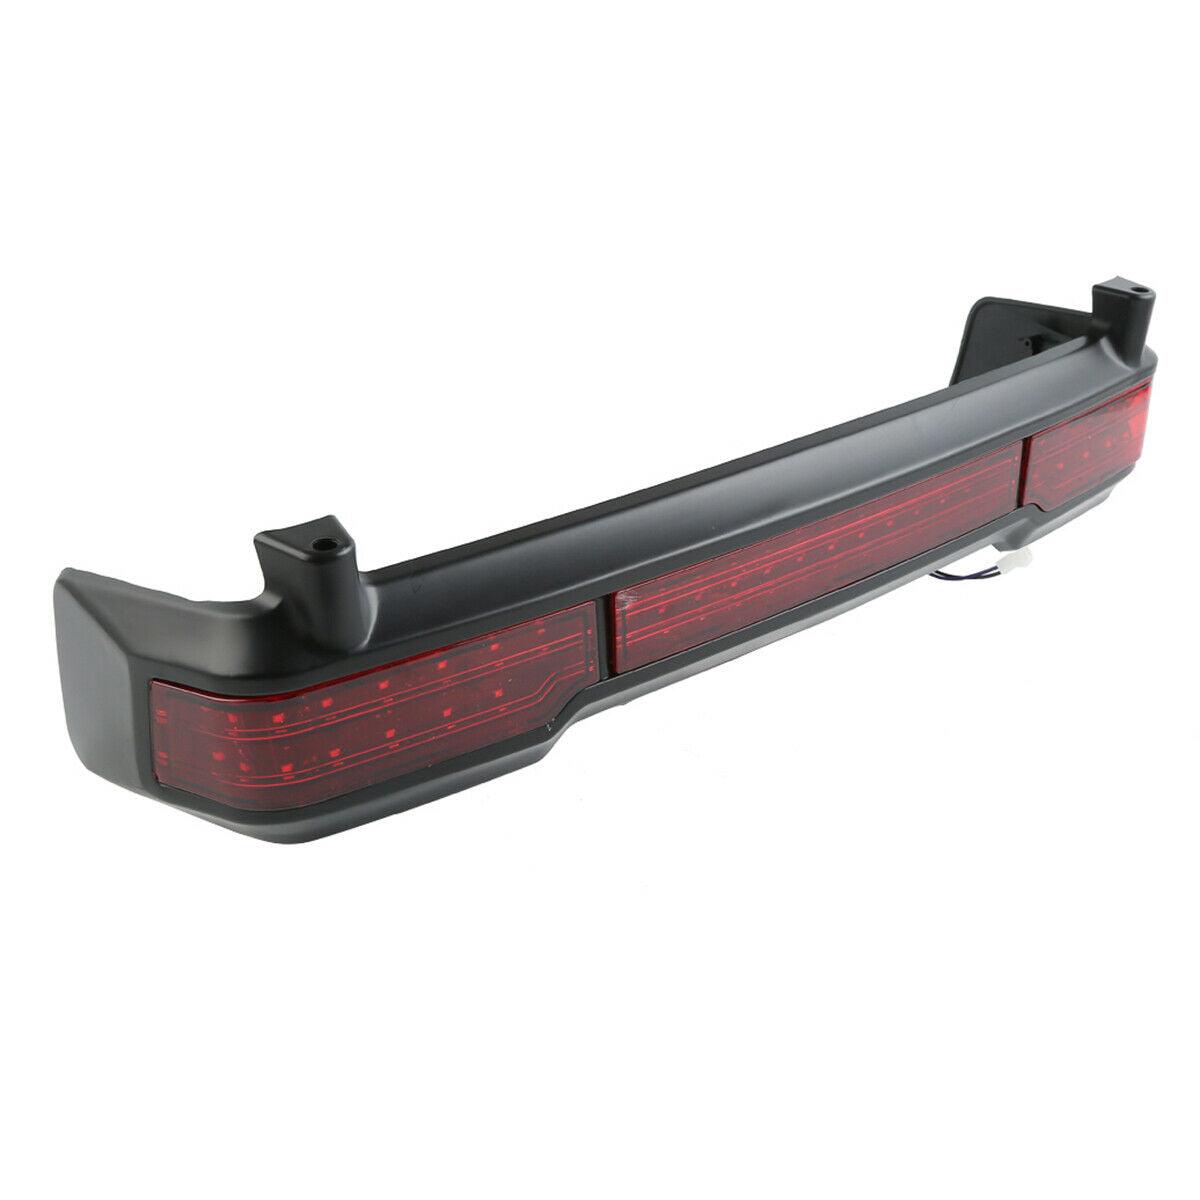 Black LED Tail Brake Light Fit For Harley Touring Road King Tour Pack 1997-2013 - Moto Life Products